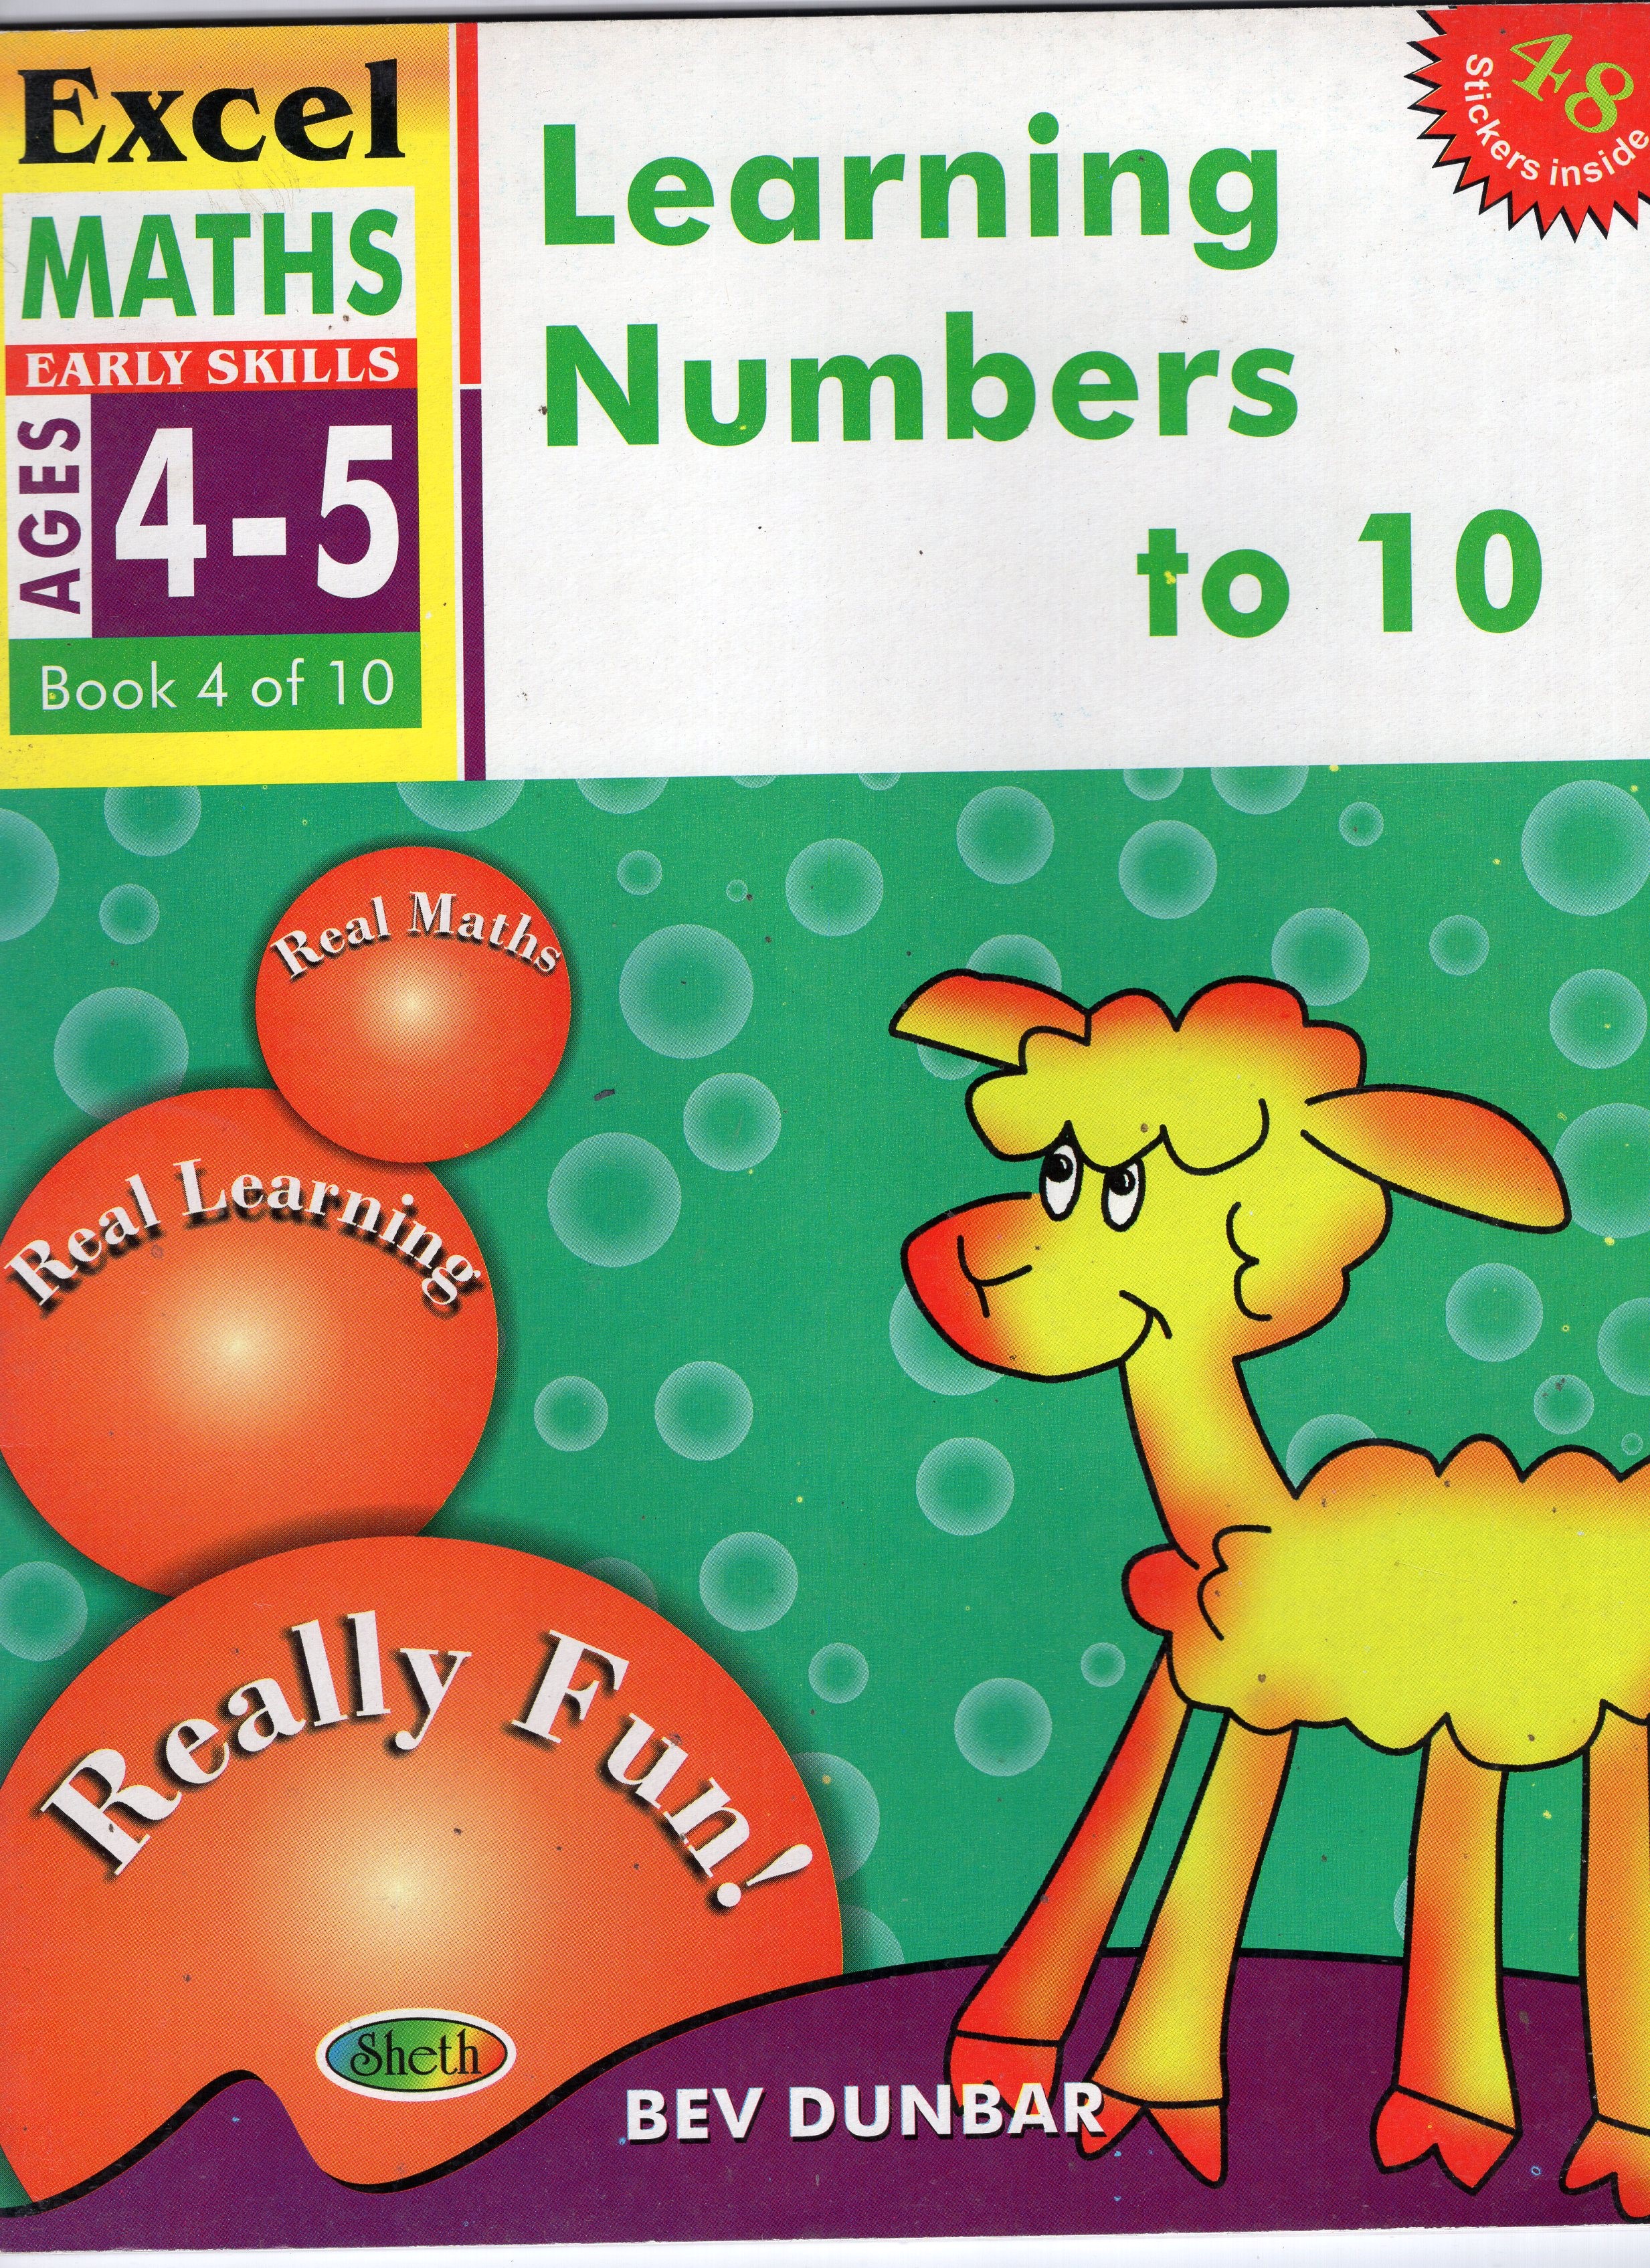 LEARNING NUMBERS TO 10